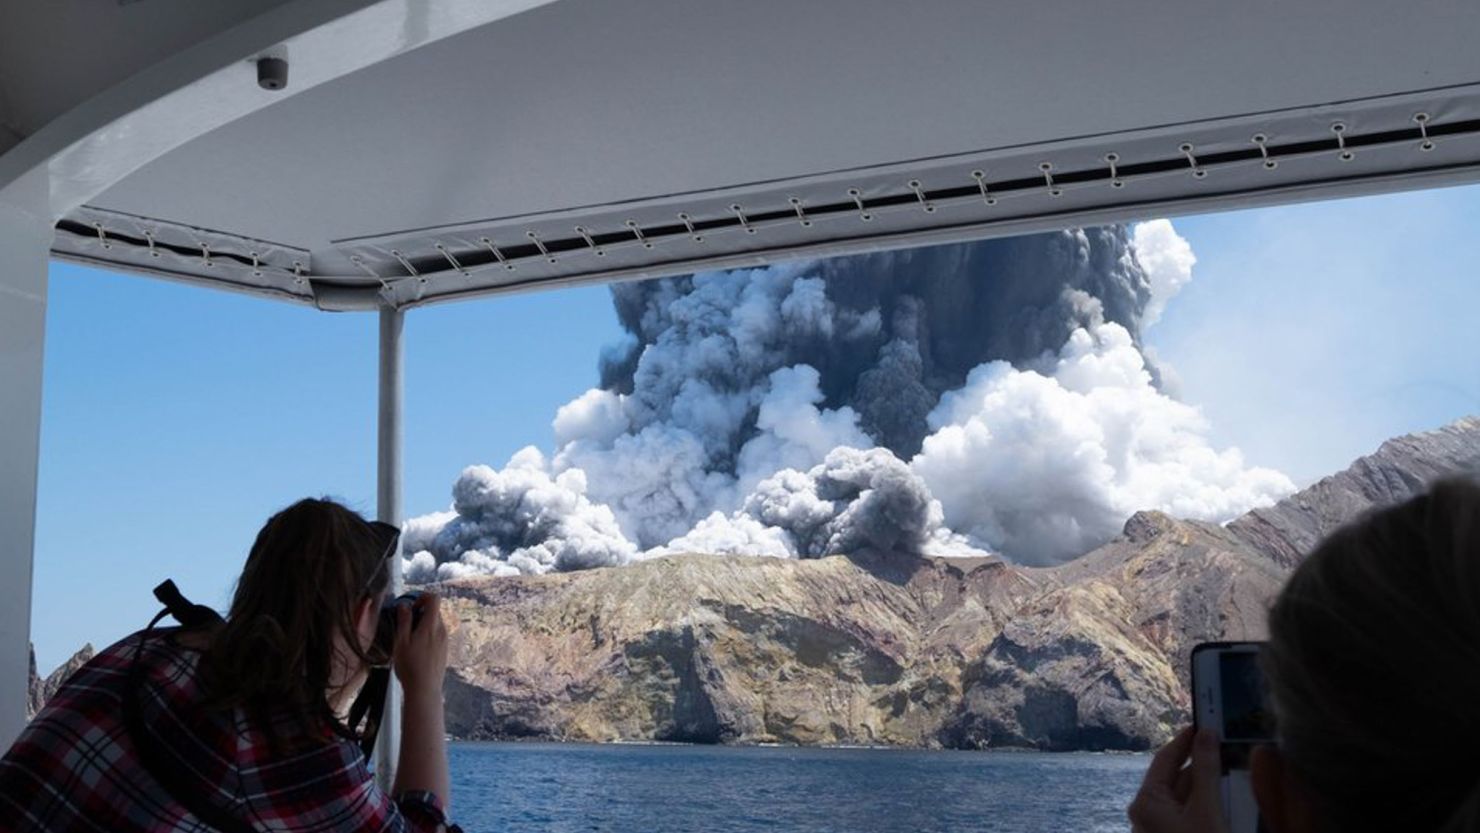 A person takes photos of volcanic eruption at New Zealand's Whakaari, or White Island, Dec. 9, 2019.